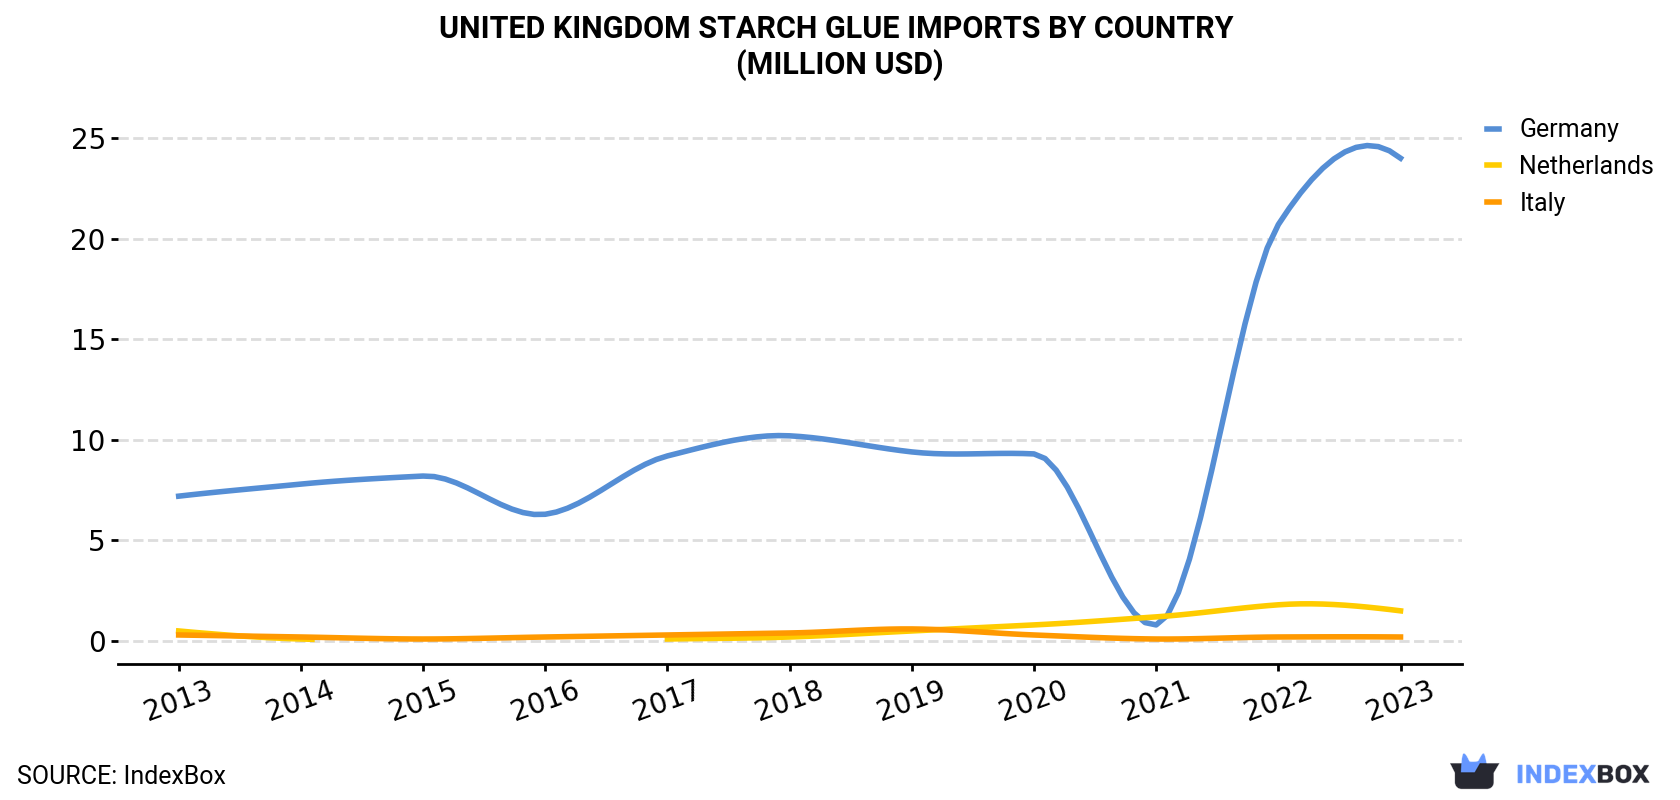 United Kingdom Starch Glue Imports By Country (Million USD)